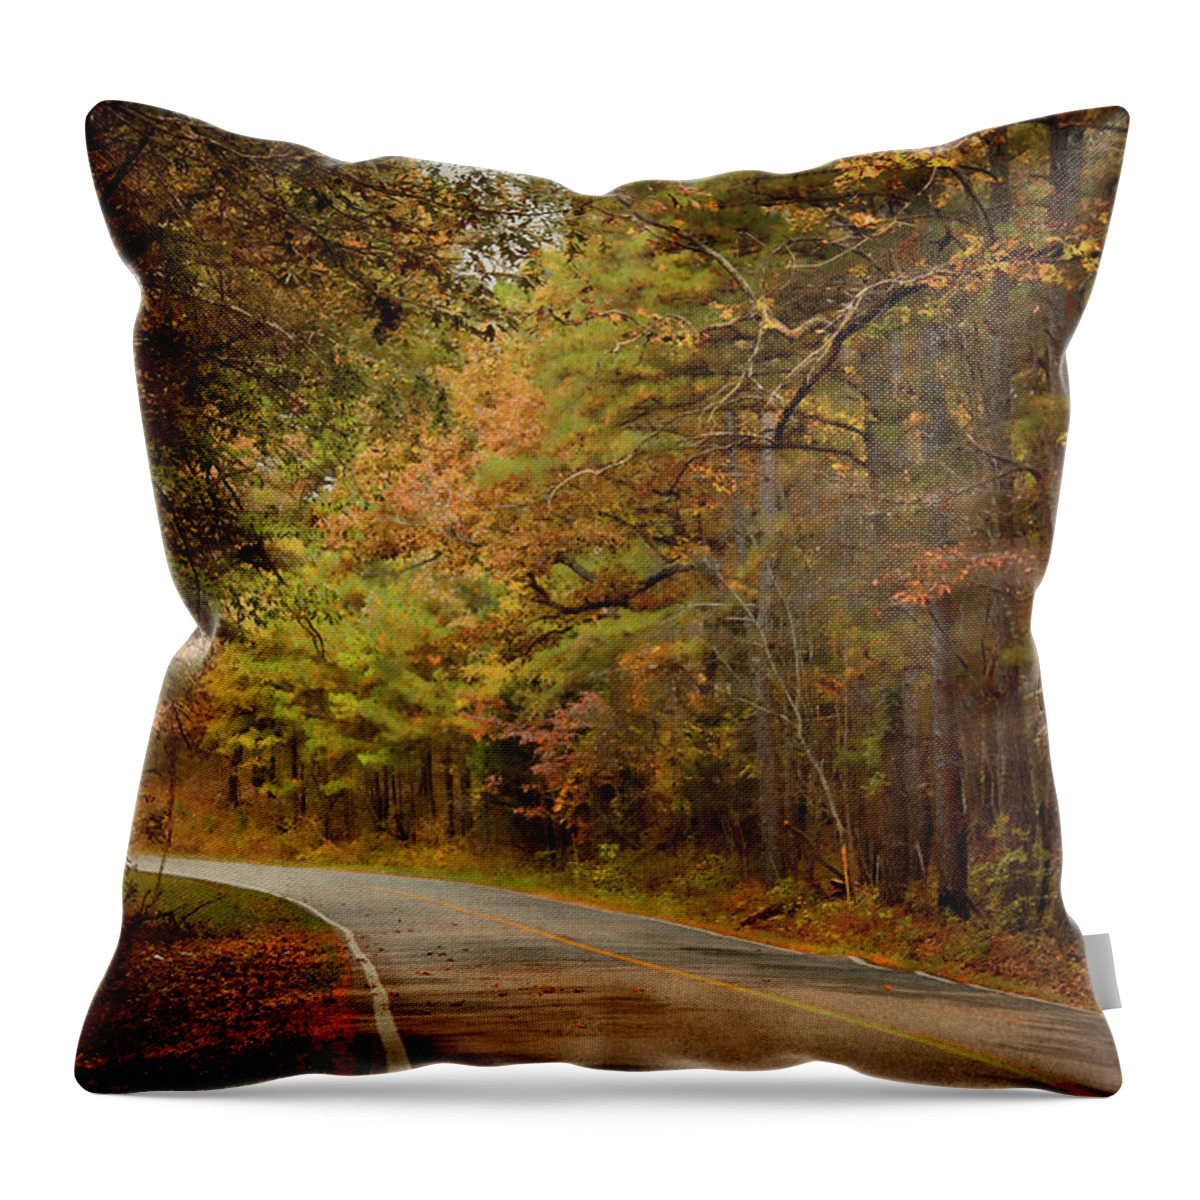 Arkansas Throw Pillow featuring the photograph Autumn Road by Lana Trussell